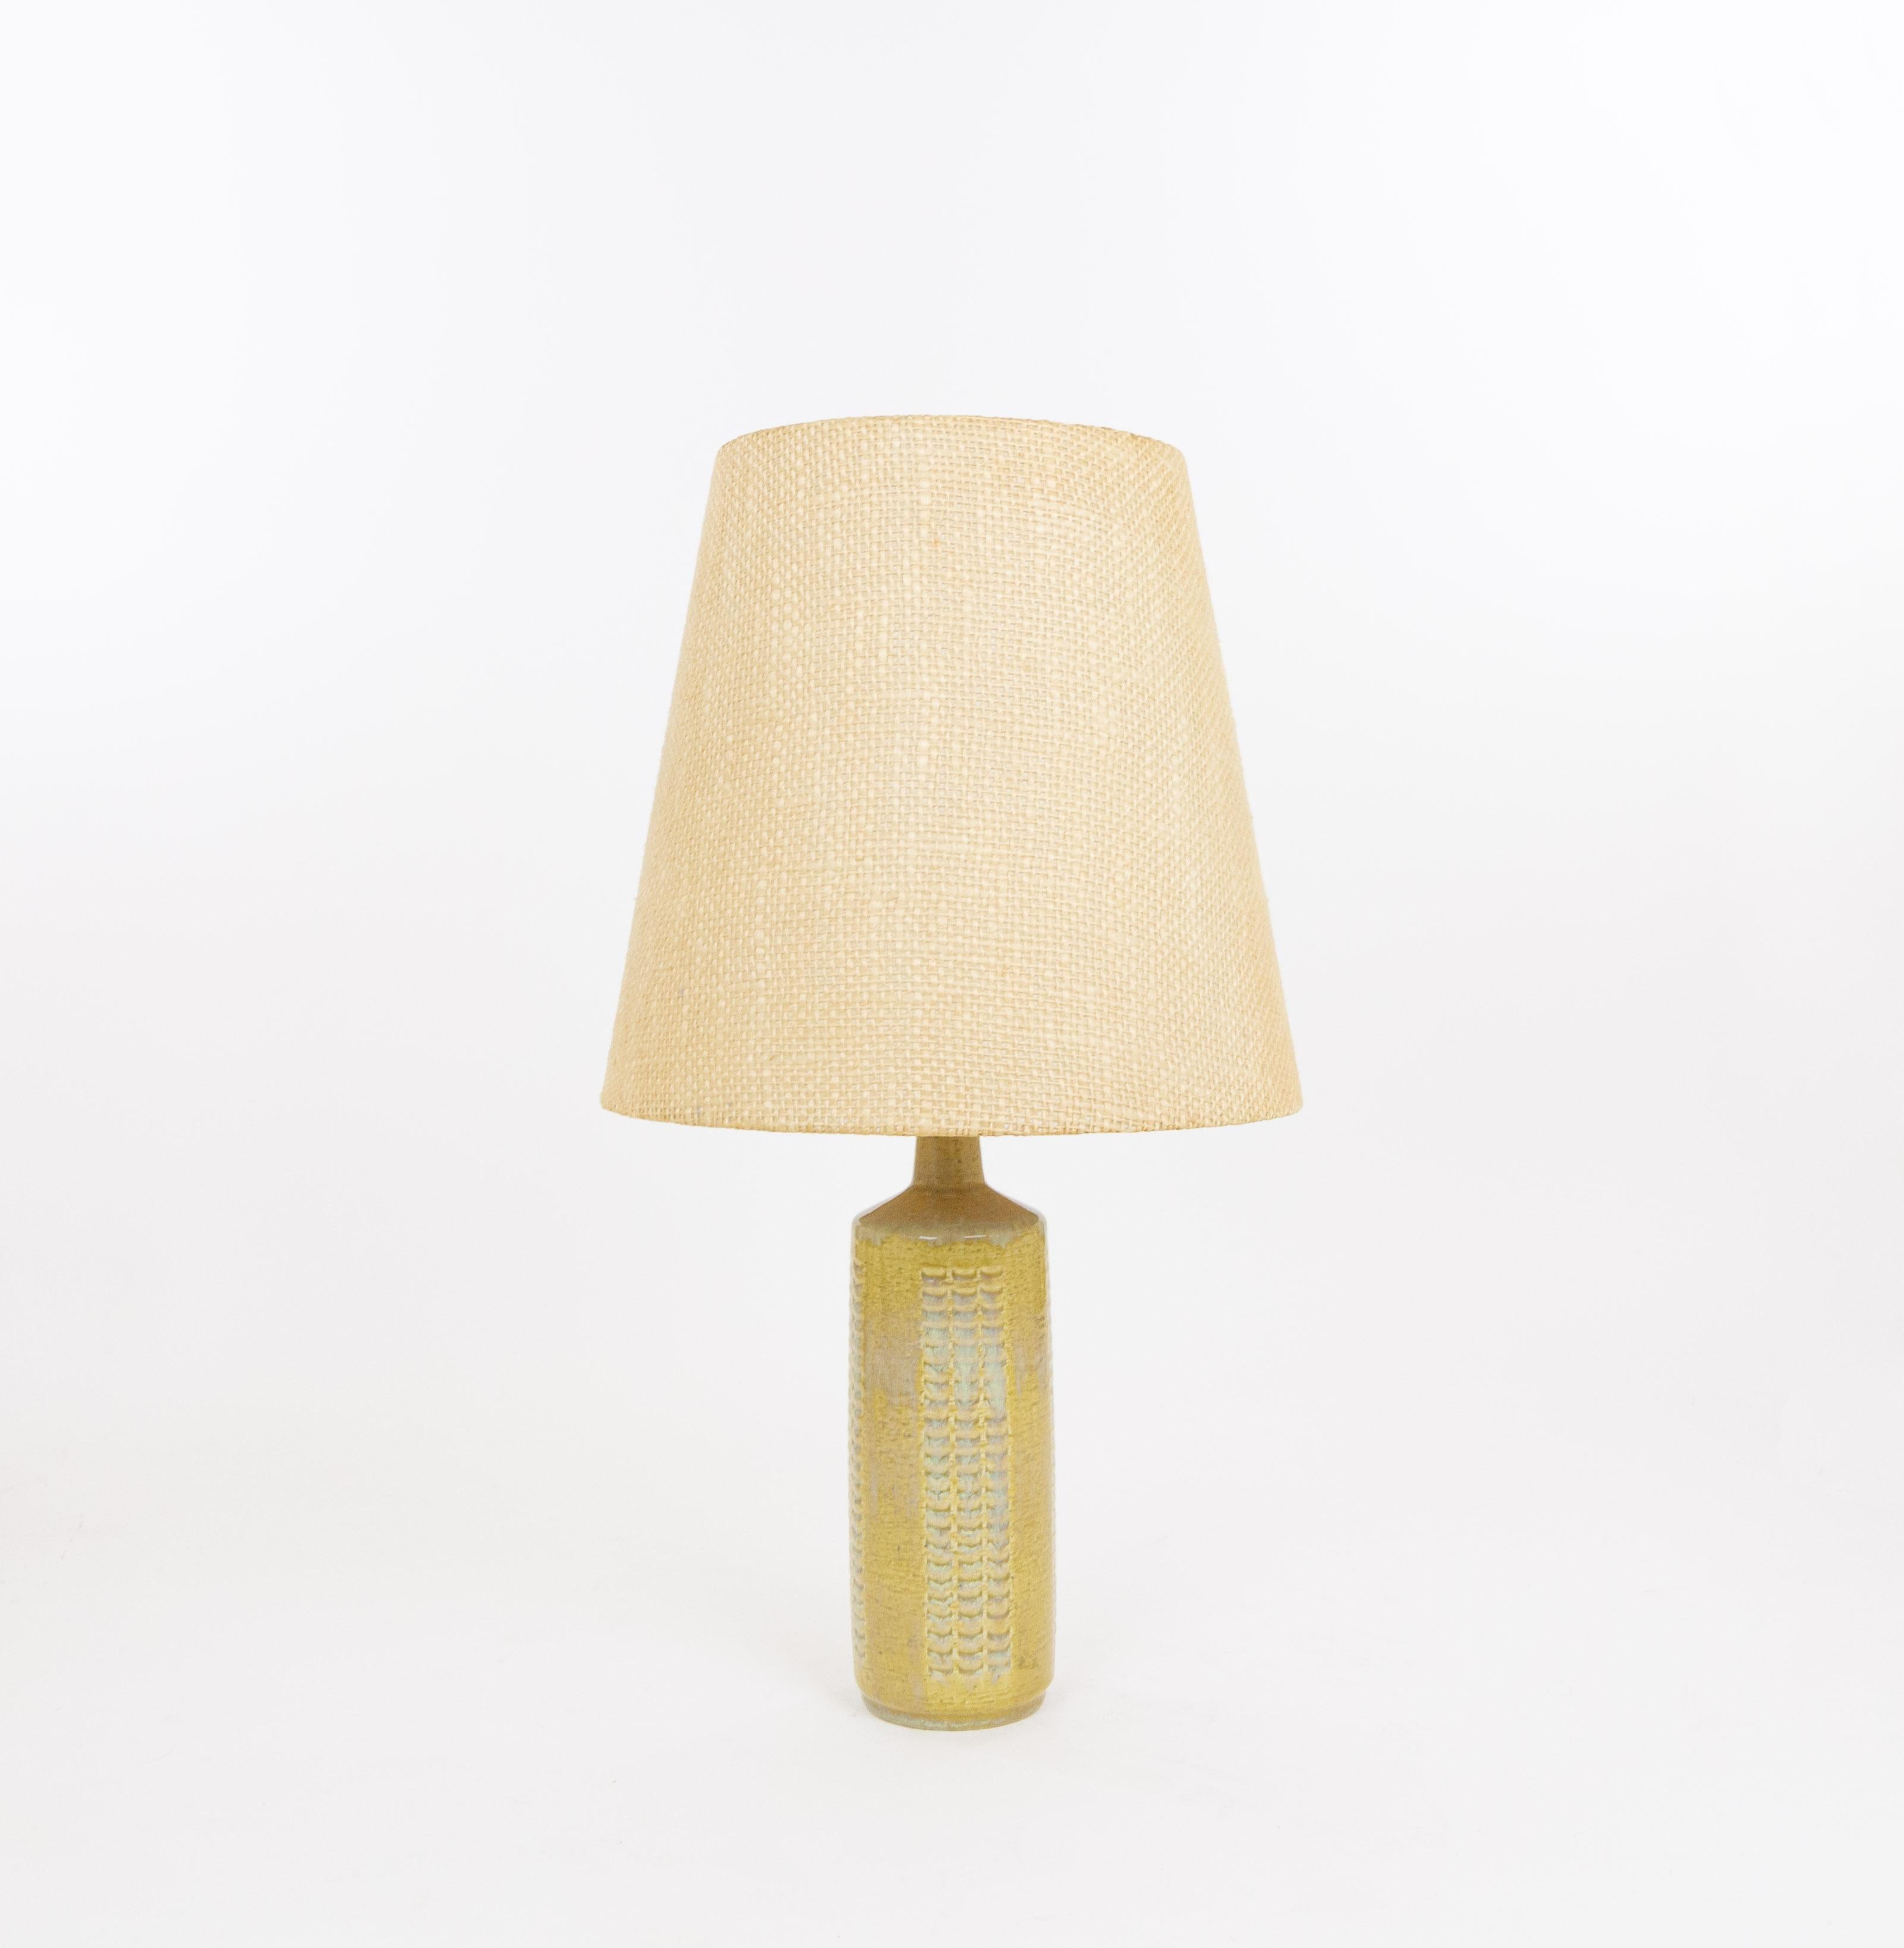 Model DL/27 table lamp made by Annelise and Per Linnemann-Schmidt for Palshus in the 1960s. The colour of the handmade decorated base is Grain. It has impressed patterns.

The lamp comes with its original lampshade holder. The lampshade and the bowl